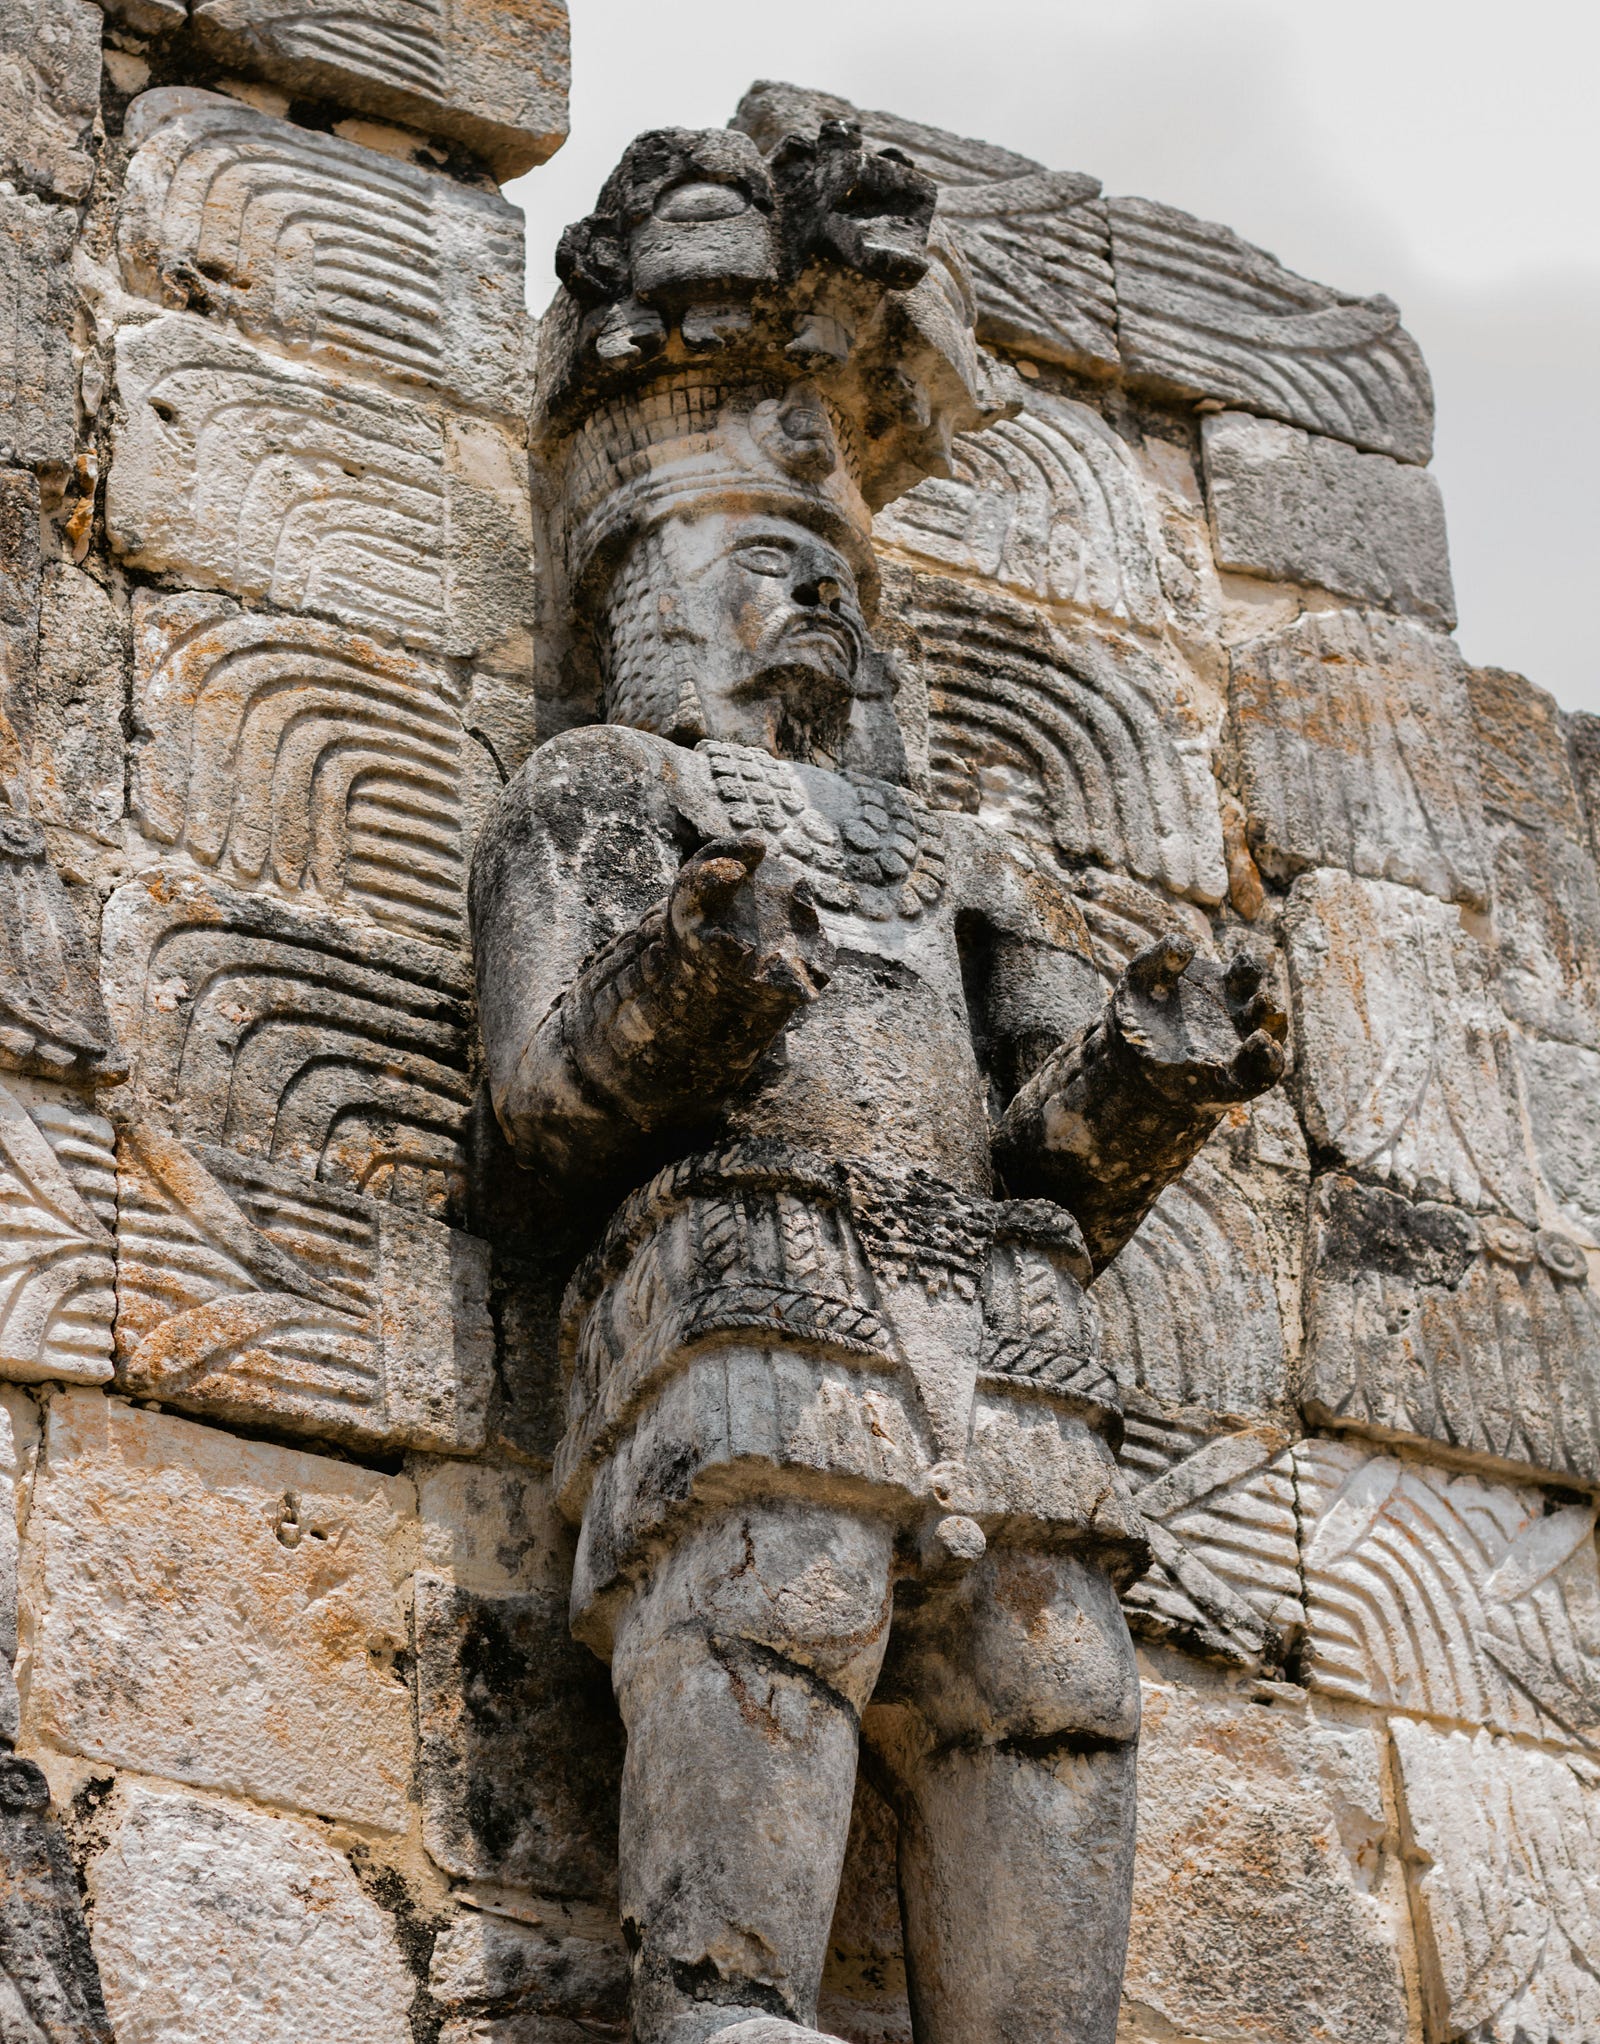 A Mayan statue of a male figure perches on the outside of an ancient building. These ancients used chicle (a natural tree gum) as a base to make a gum-like material chicle and to stick objects together in everyday use.